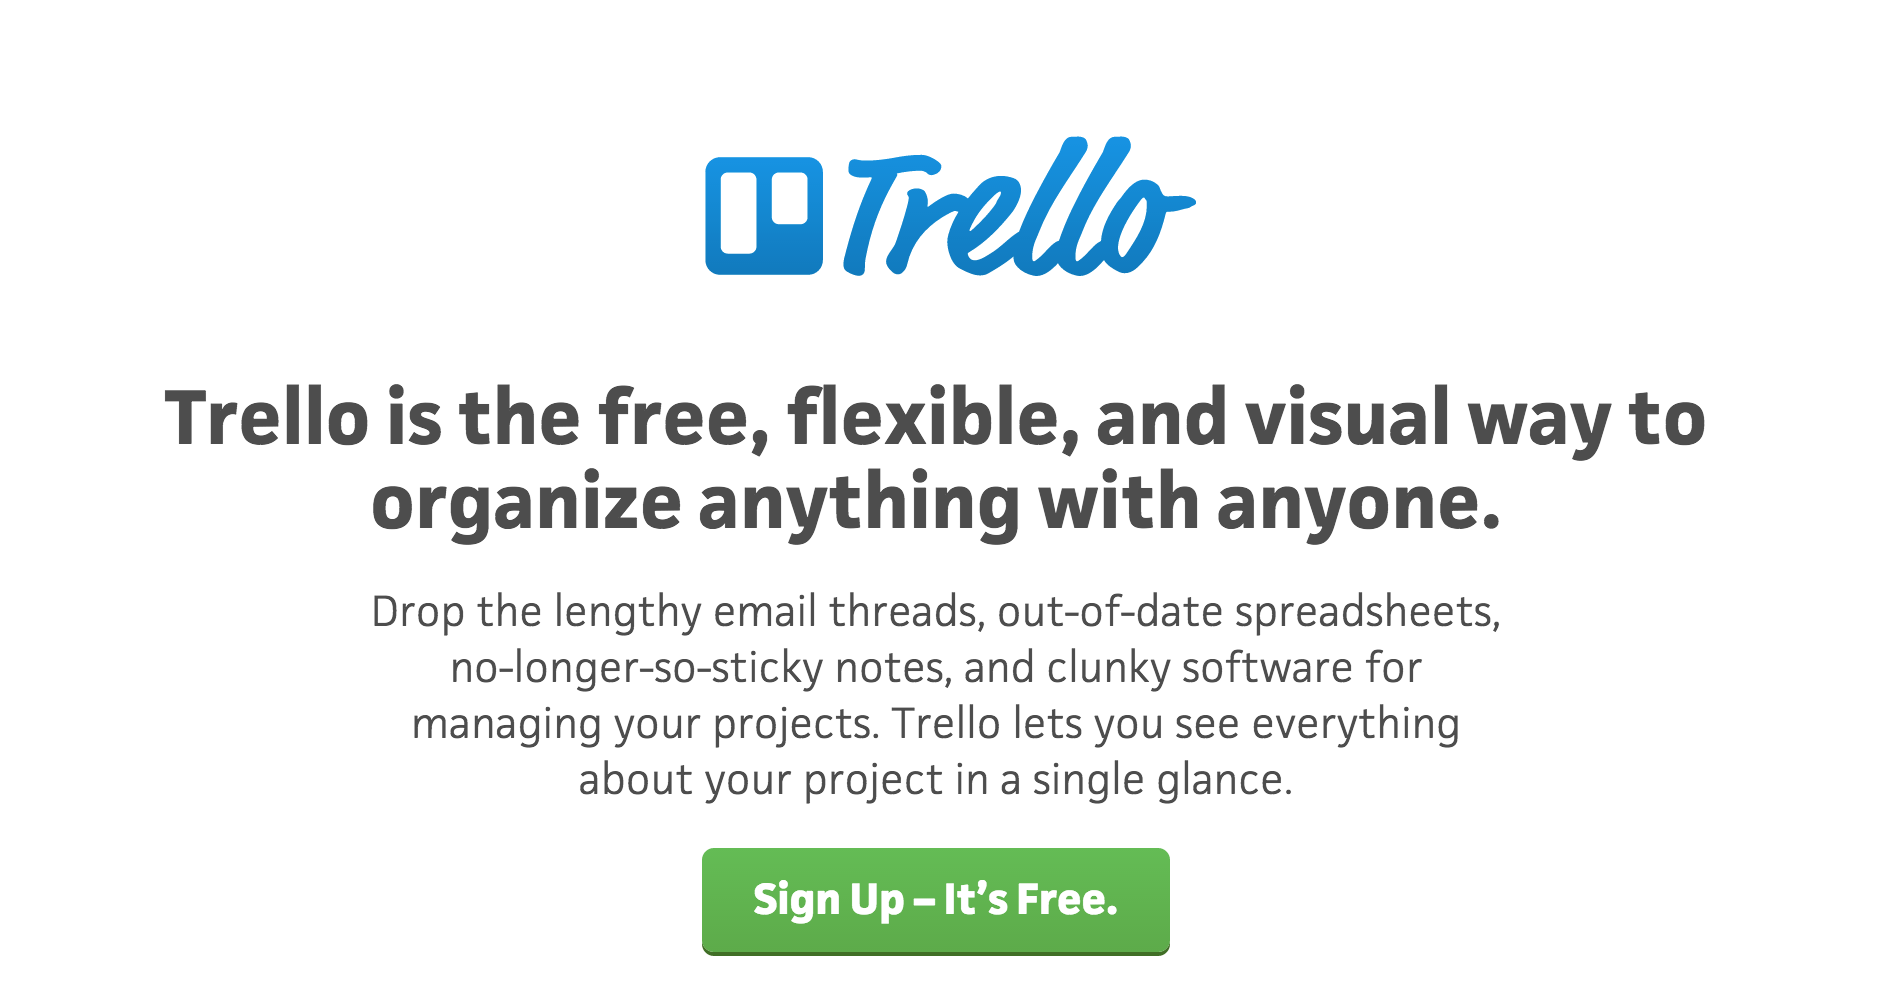 Trello collaboration to organize anything with anyone